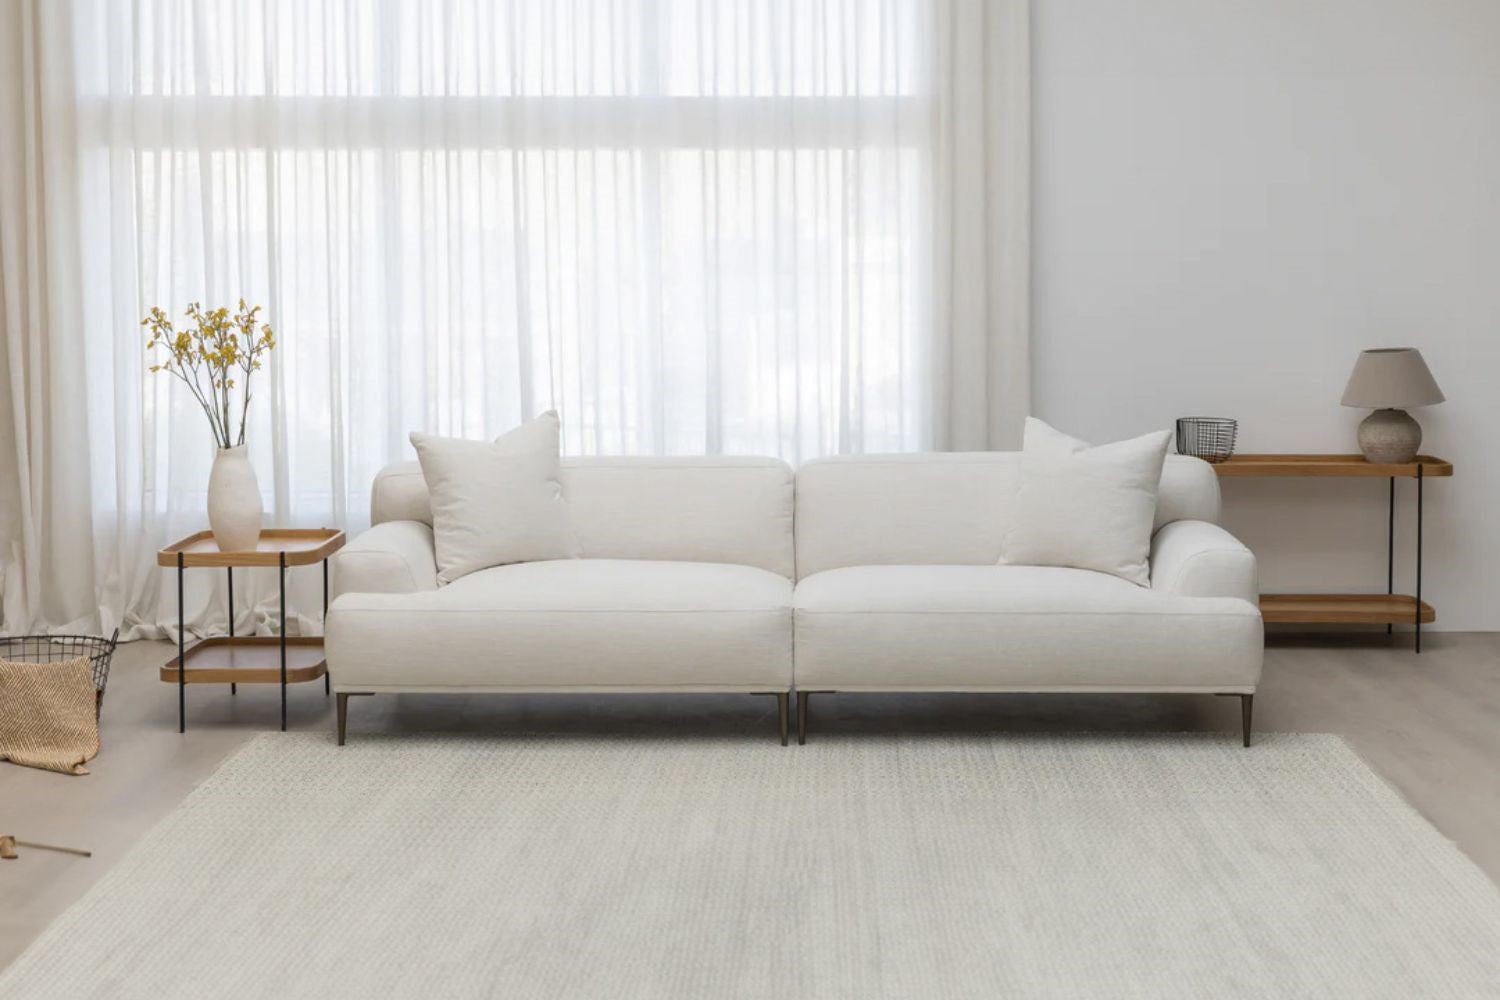 Crystal white fabric sofa in living room setting